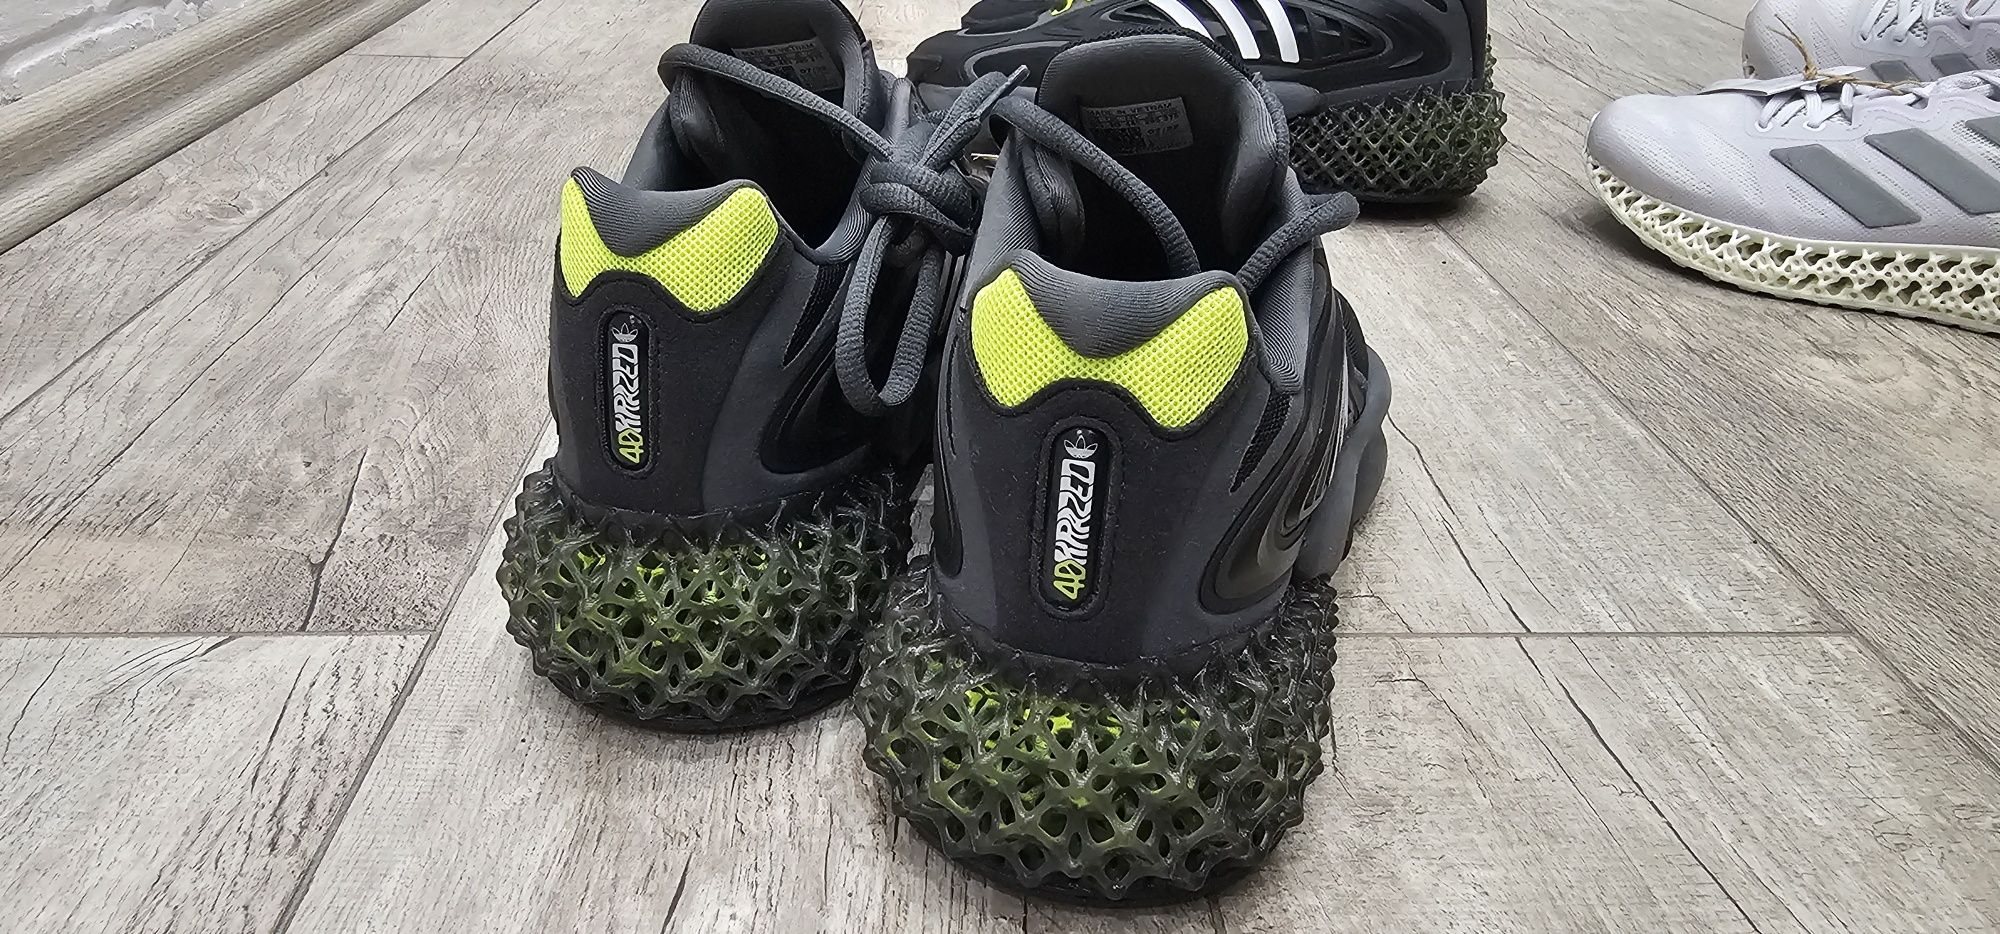 Buty Adidas 4D Krazed Shoes r 45 1/3